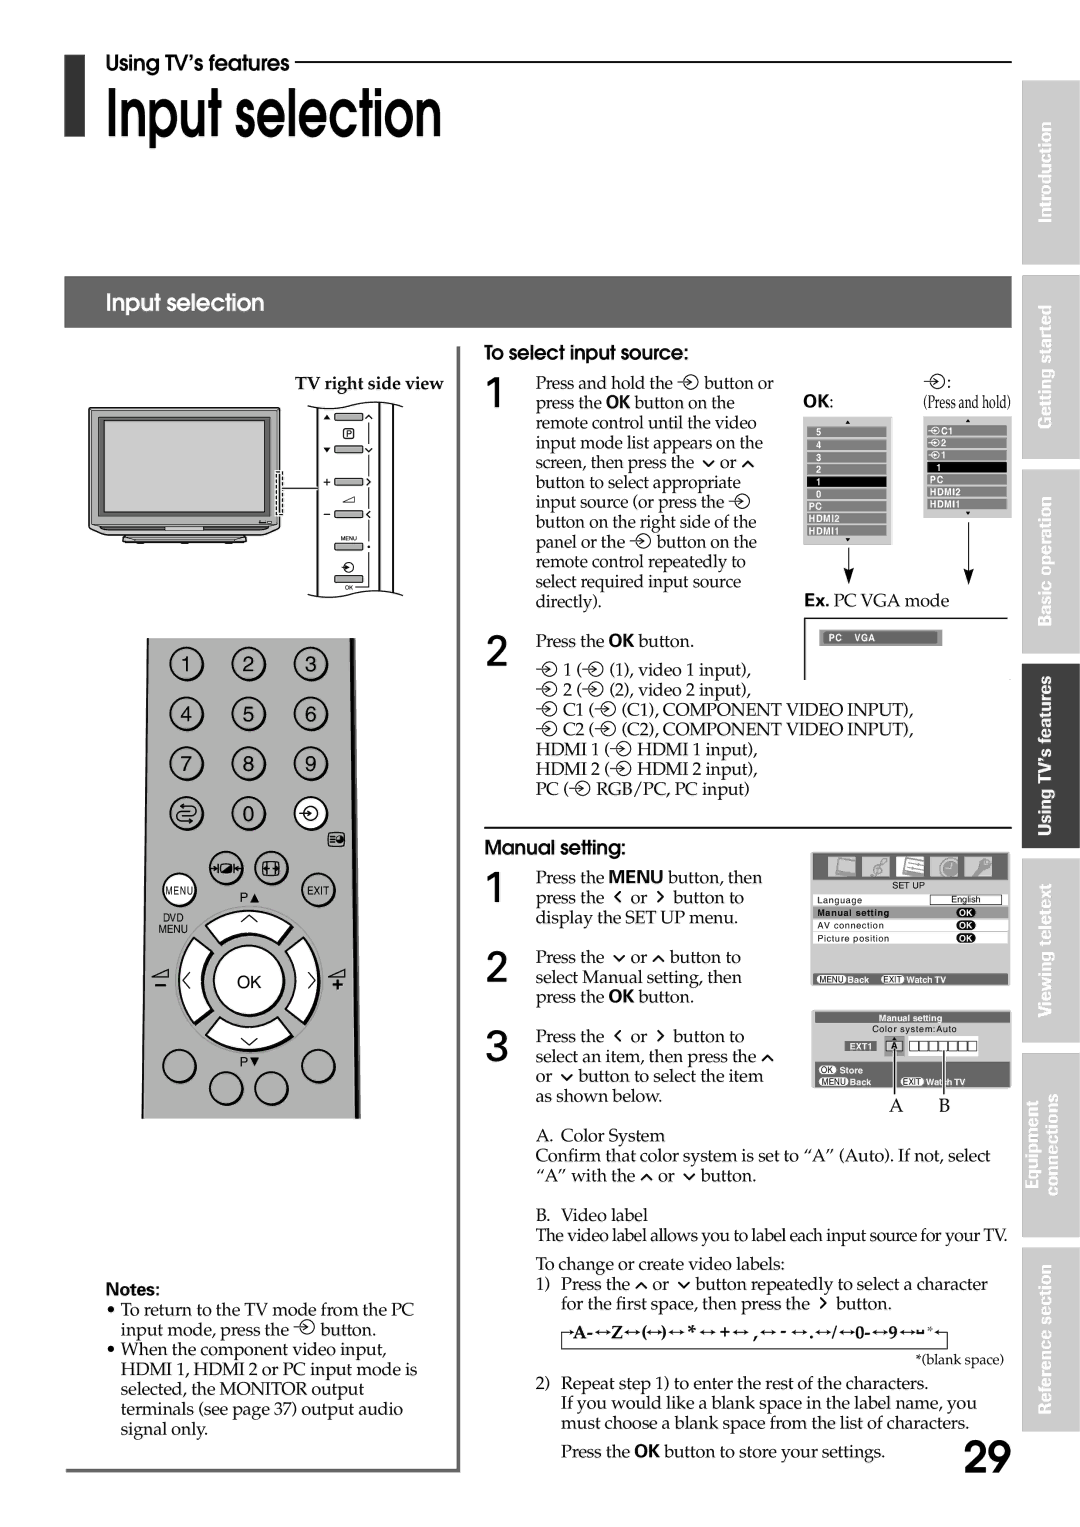 Toshiba 42WP56A, 42WP56T, 42WP56E owner manual Input selection, To select input source, Manual setting, Viewing 